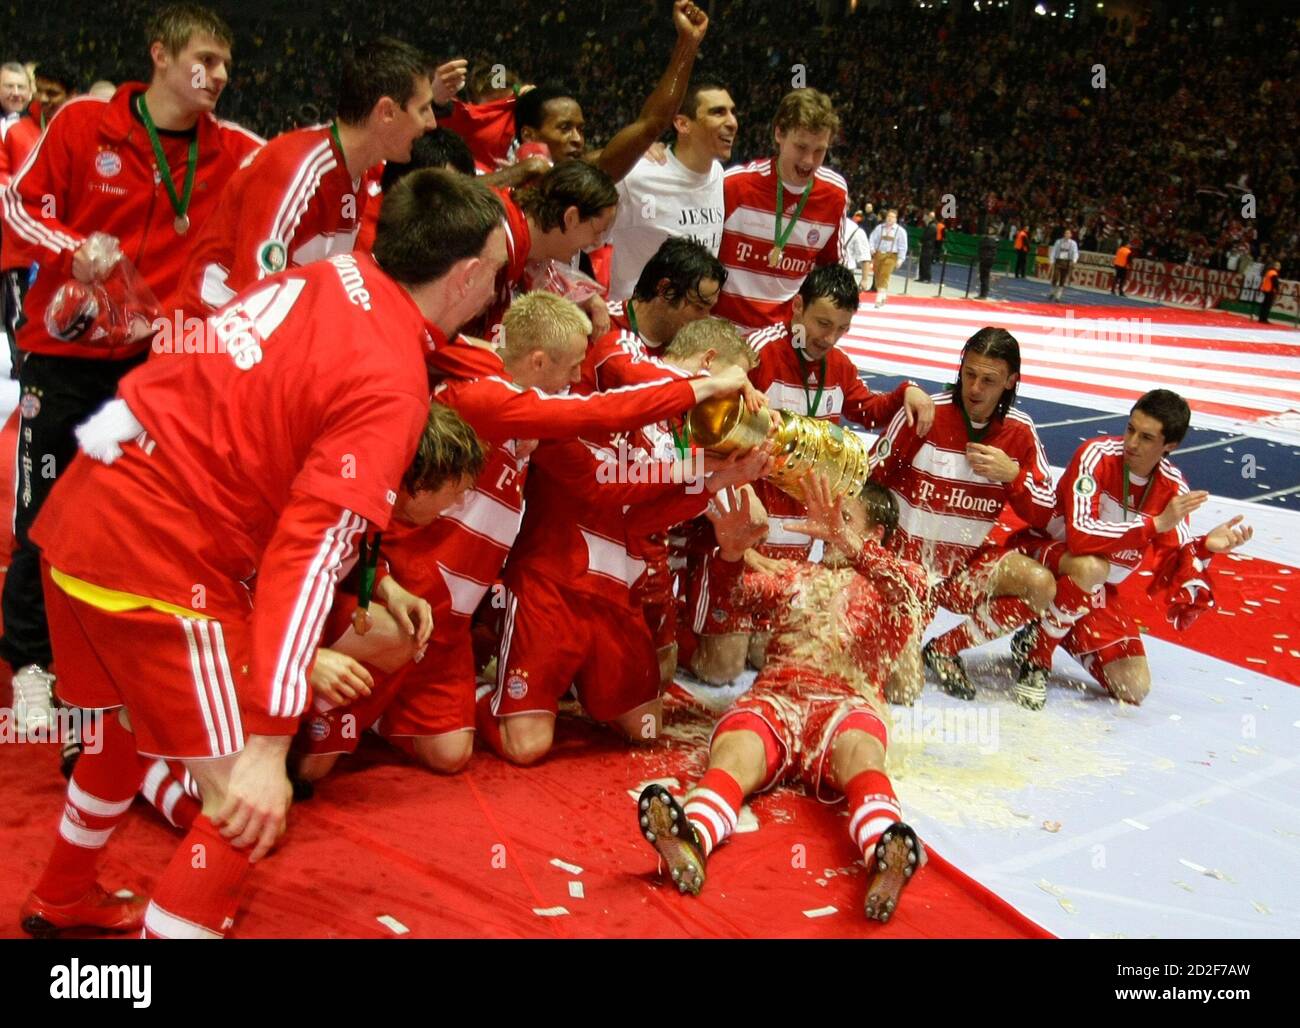 Bayern Munich's players celebrate with the trophy after winning the German  soccer cup DFB Pokal final in Berlin, April 19, 2008. Bayern won the match  2-1 after extra time. REUTERS/Michael Dalder (GERMANY